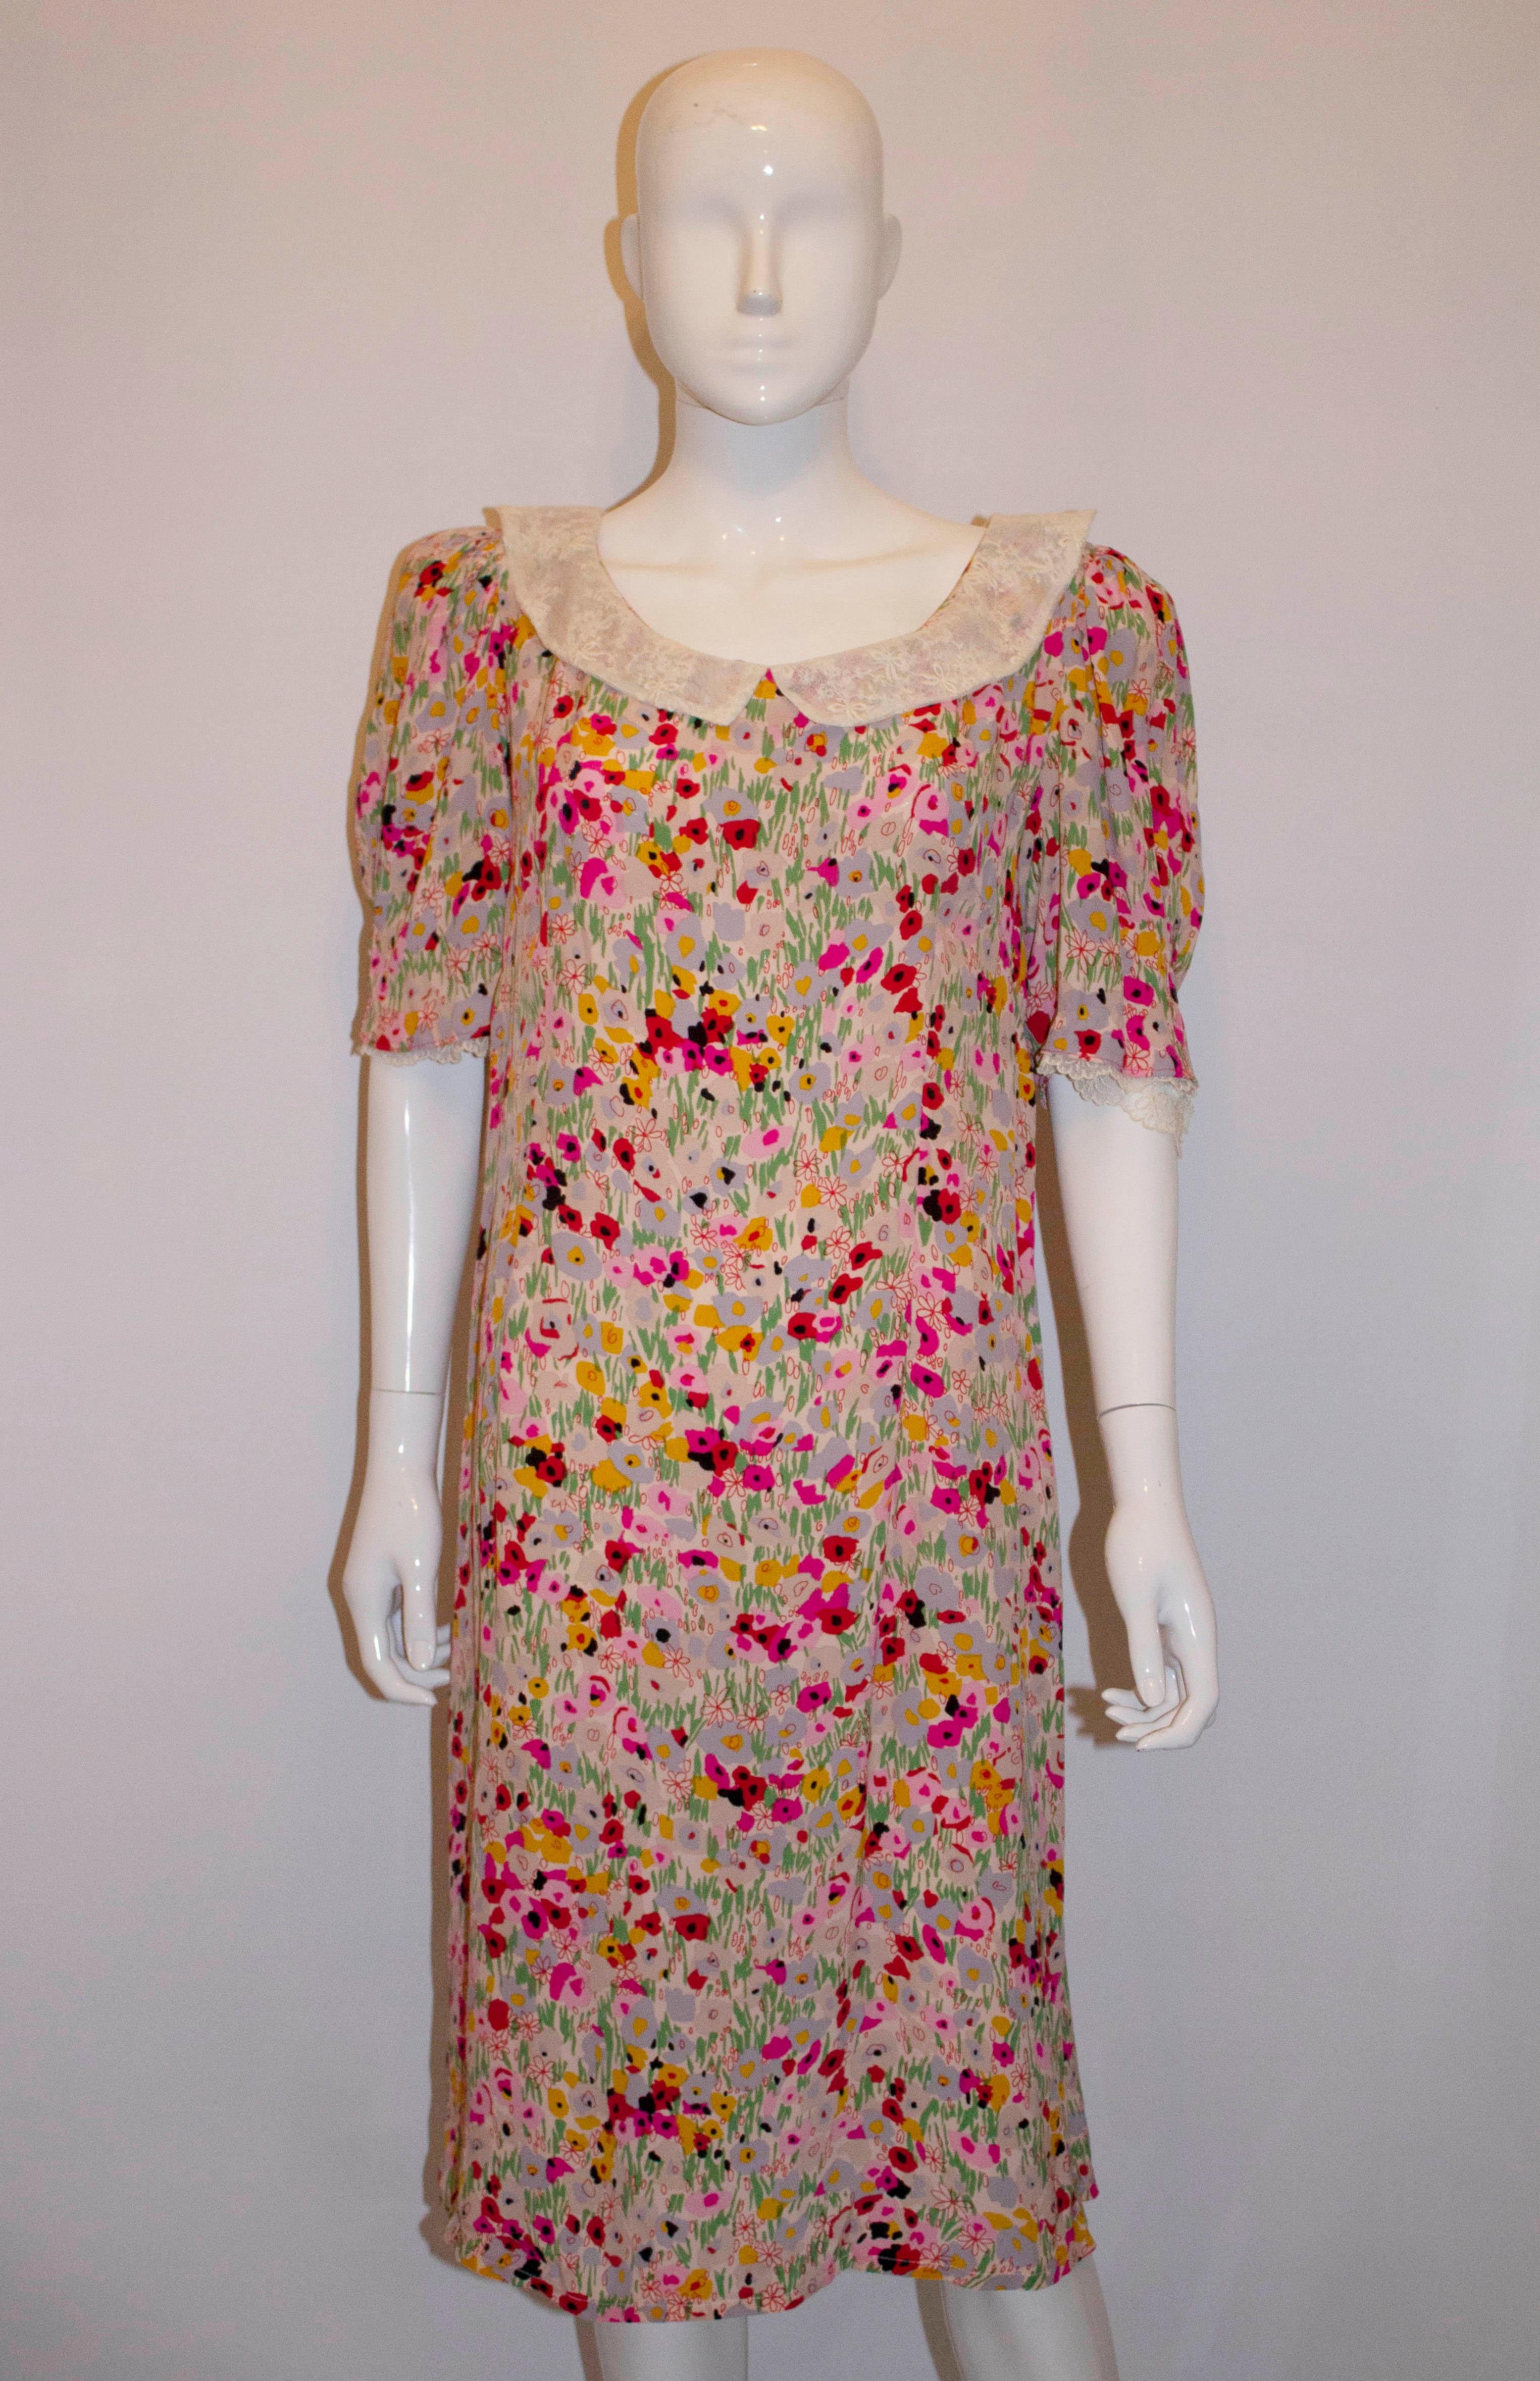 A vintage dress in a pretty print with lace detail,  The dress has a lace trimmed collar and sleaves and a central back zip opening. It is unlined. Measurements: Bust up to 40'', length 44''.